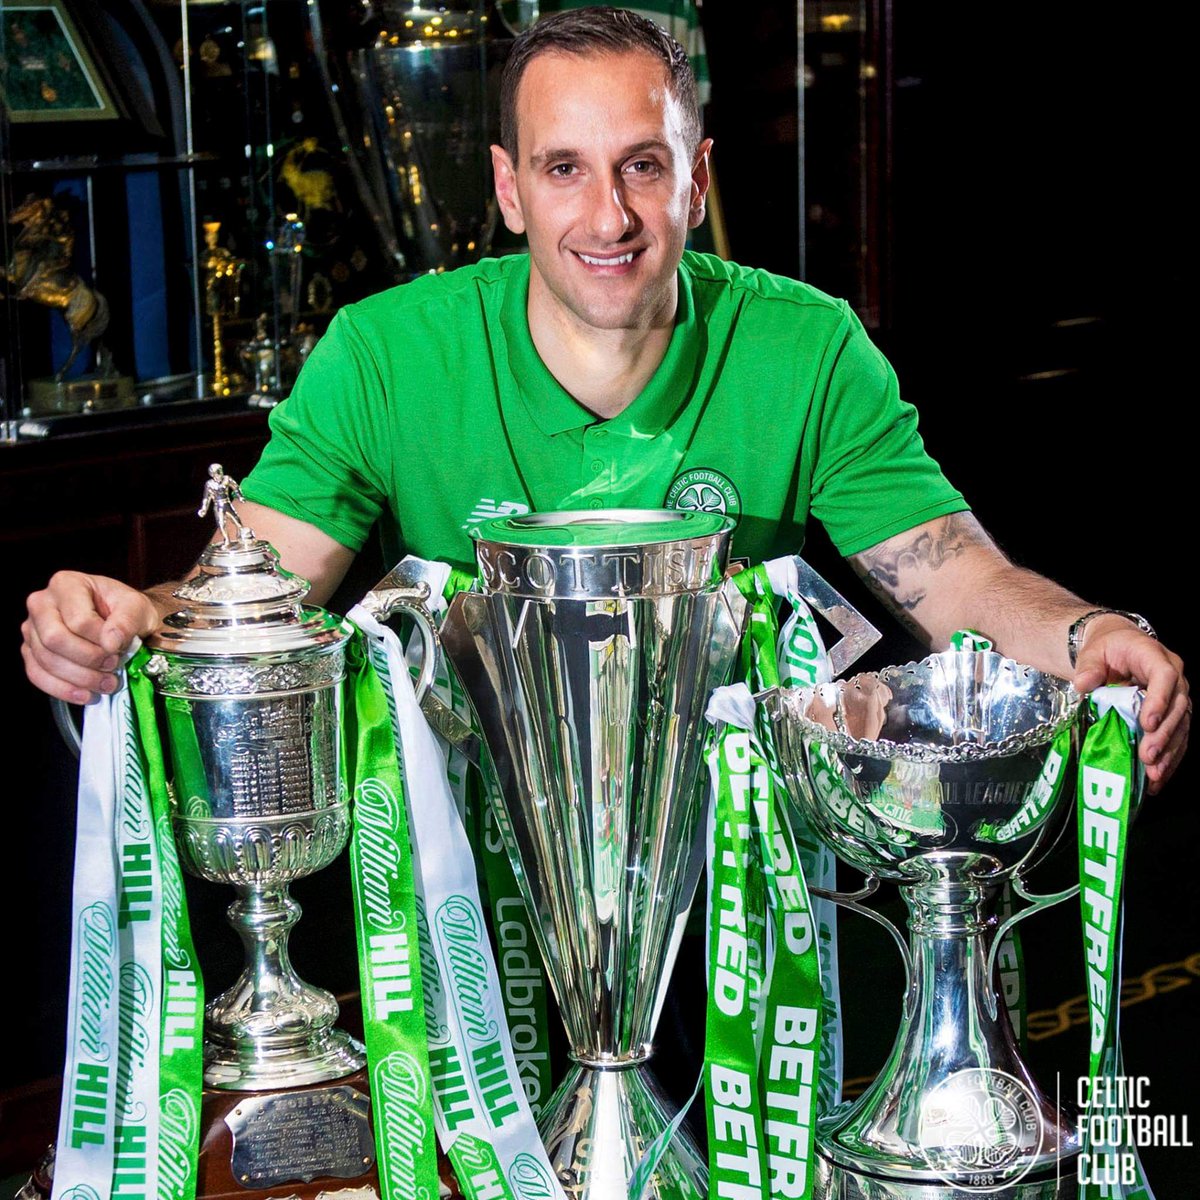 John Kennedy has for a 2nd time turned down a chance to go to the EPL & will instead stay at Celtic.

Has devoted 30 years of his life to the club. Helped deliver 20 major trophies. 5 trebles.

Deserves so much respect for his incredible loyalty.

A Celt to the core.

HH 🍀